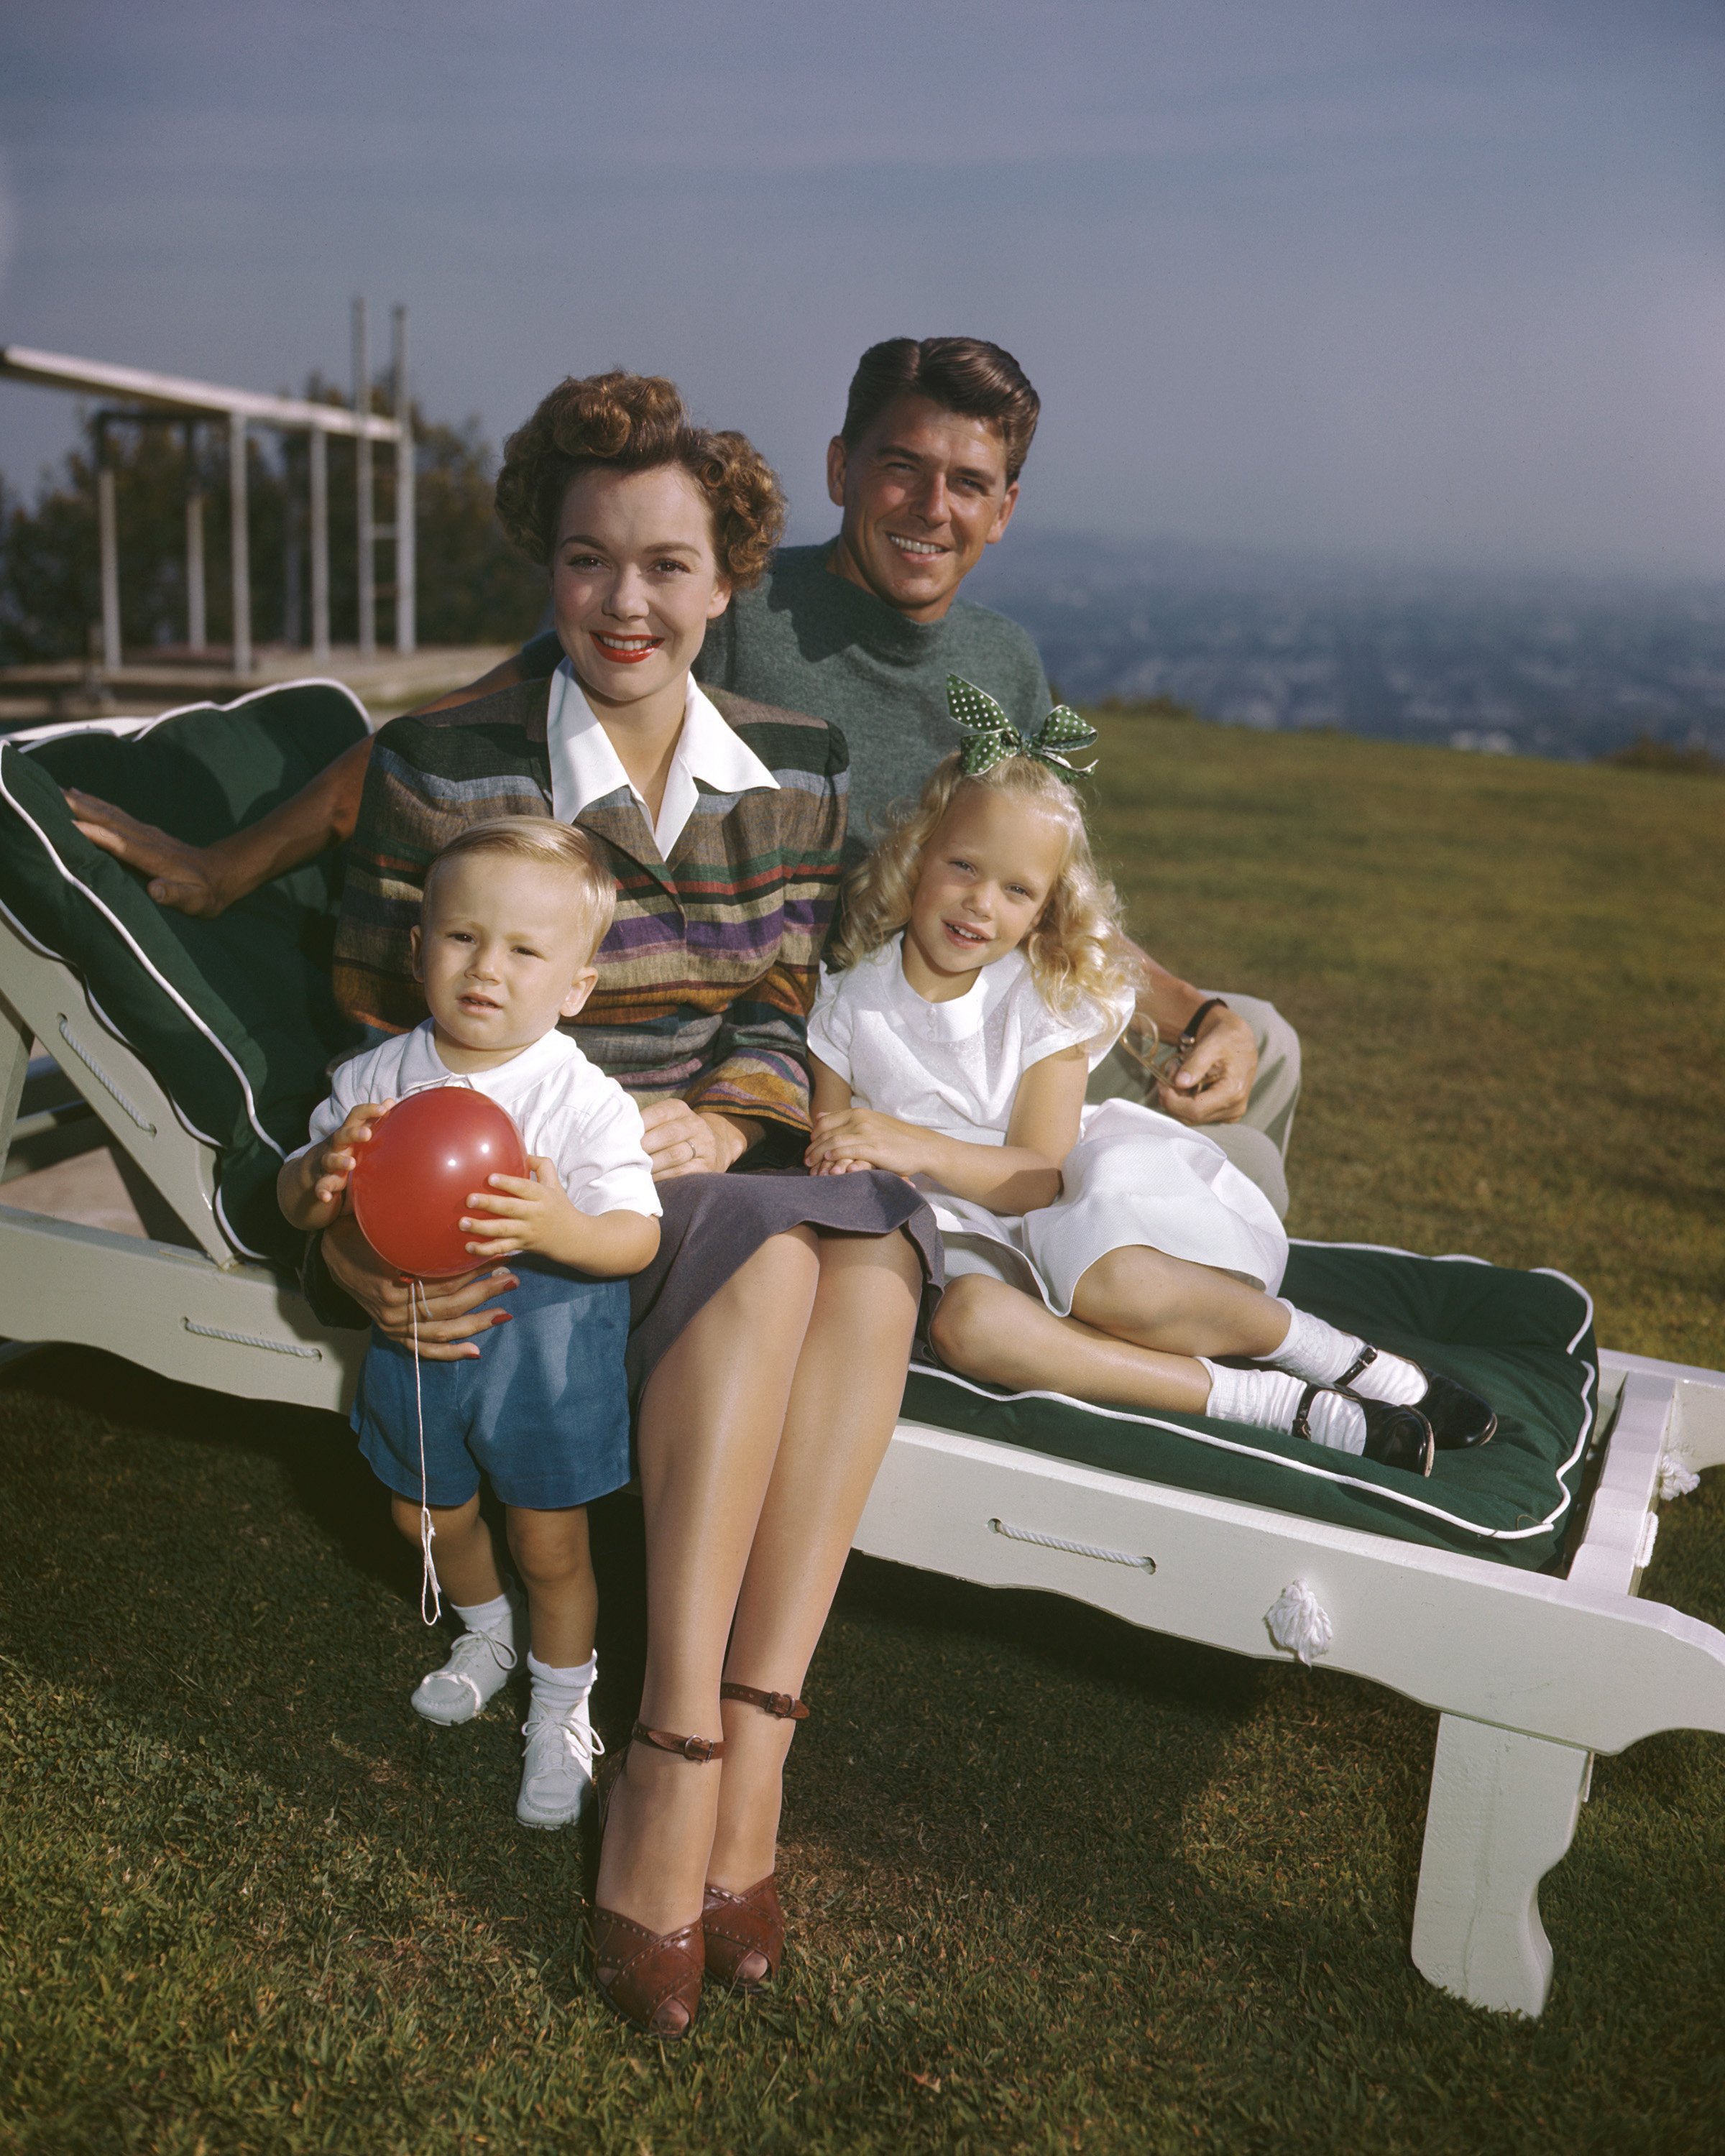 Ronald Reagan and his wife, actress Jane Wyman with their children Maureen and Michael, circa 1946 | Source: Getty Images